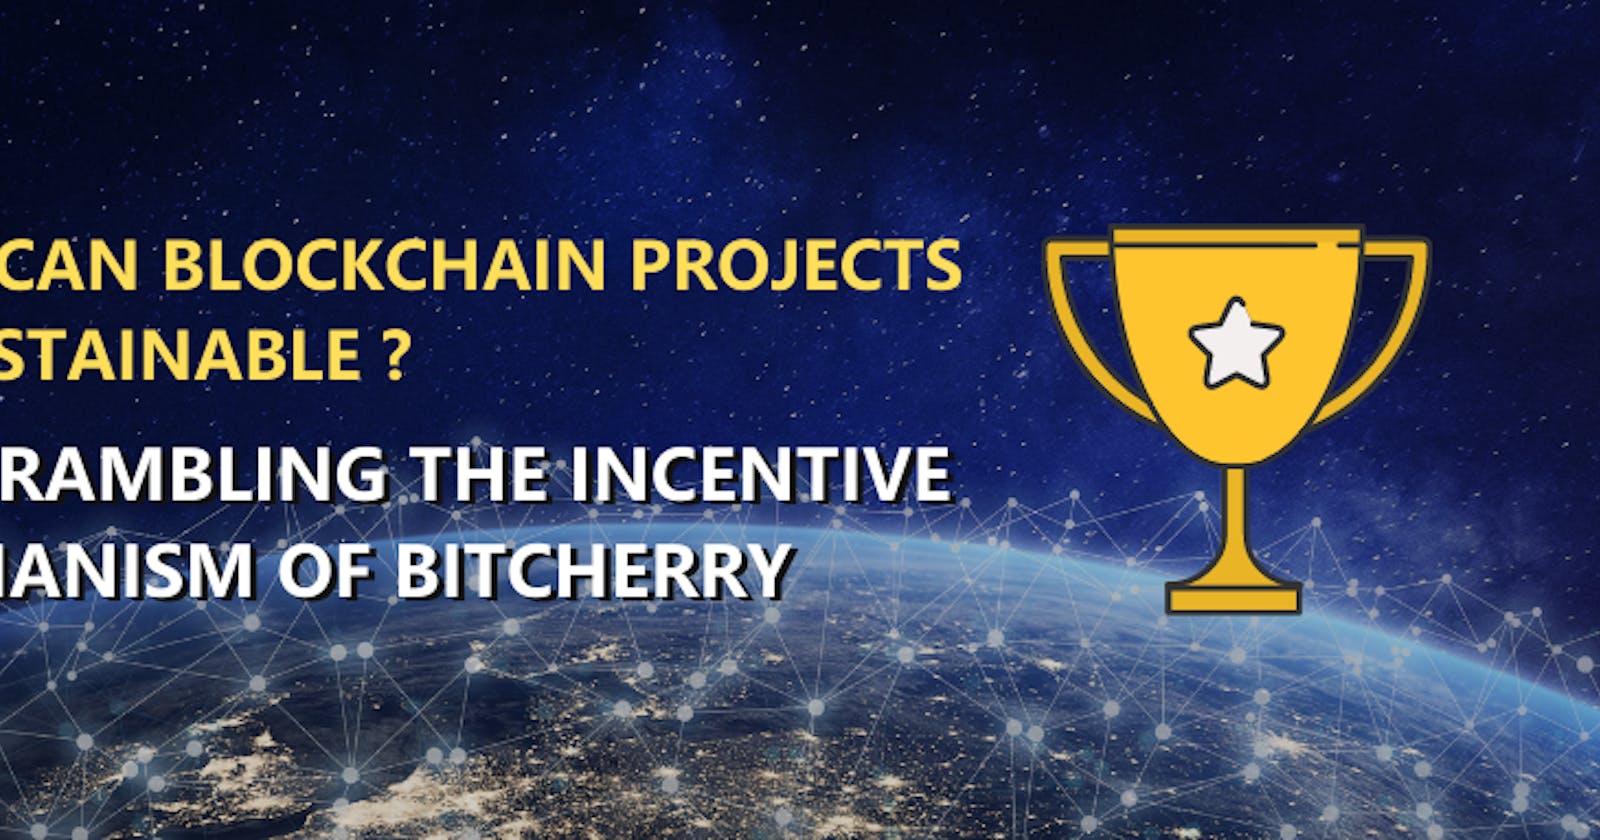 How can blockchain projects be sustainable? Unscrambling the incentive mechanism of BitCherry